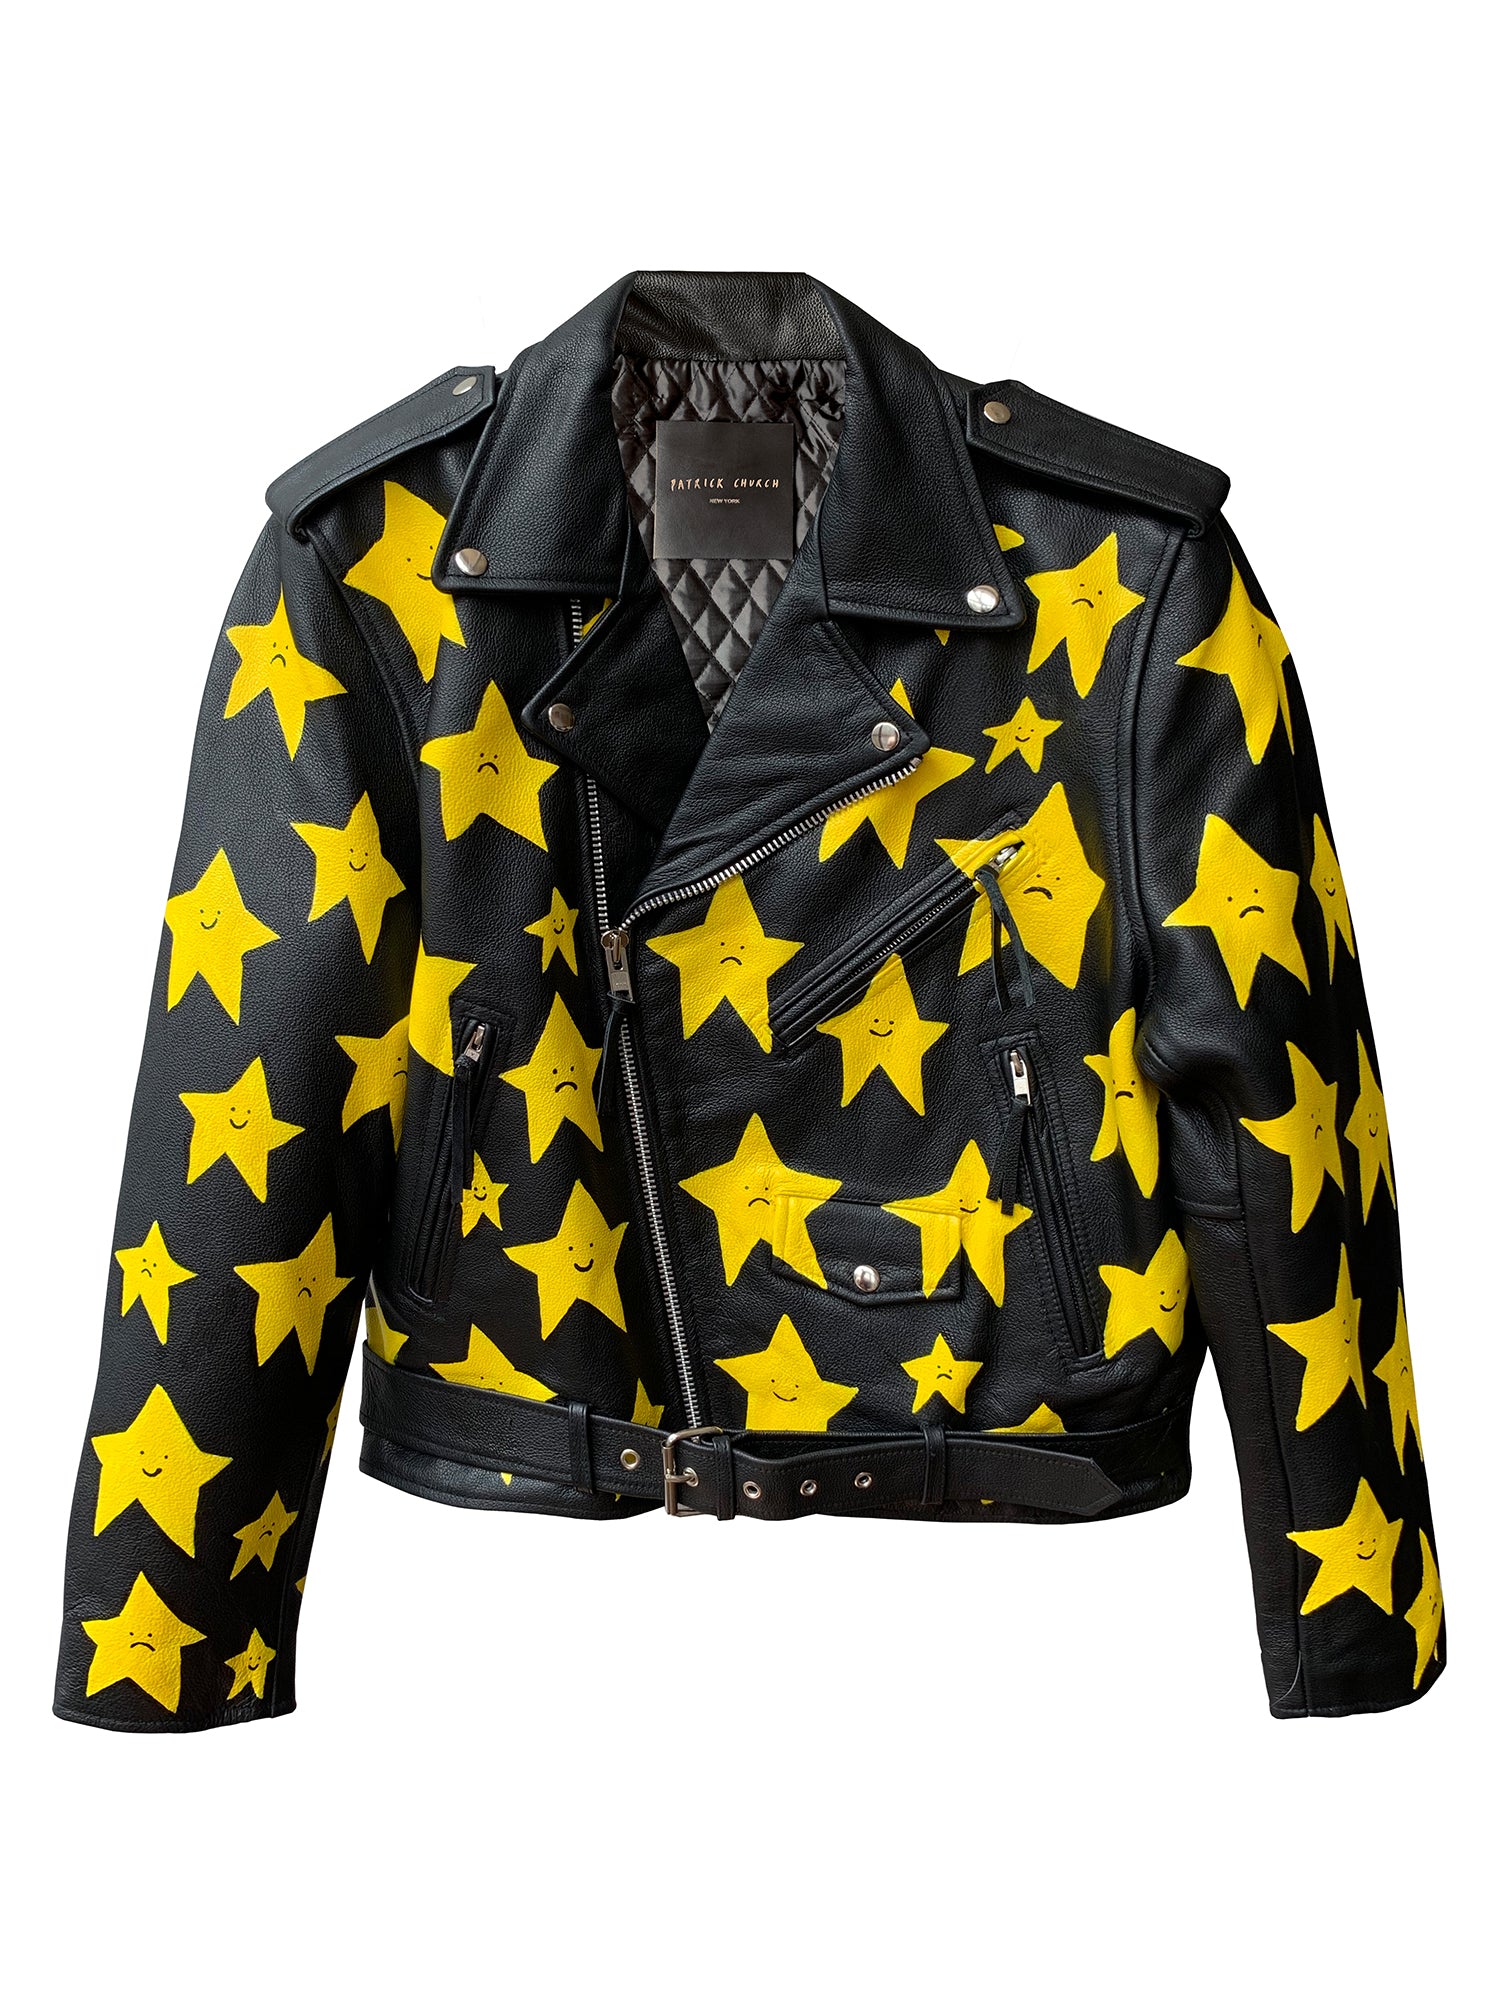 'STAR' Hand Painted Leather Jacket - Patrick Church